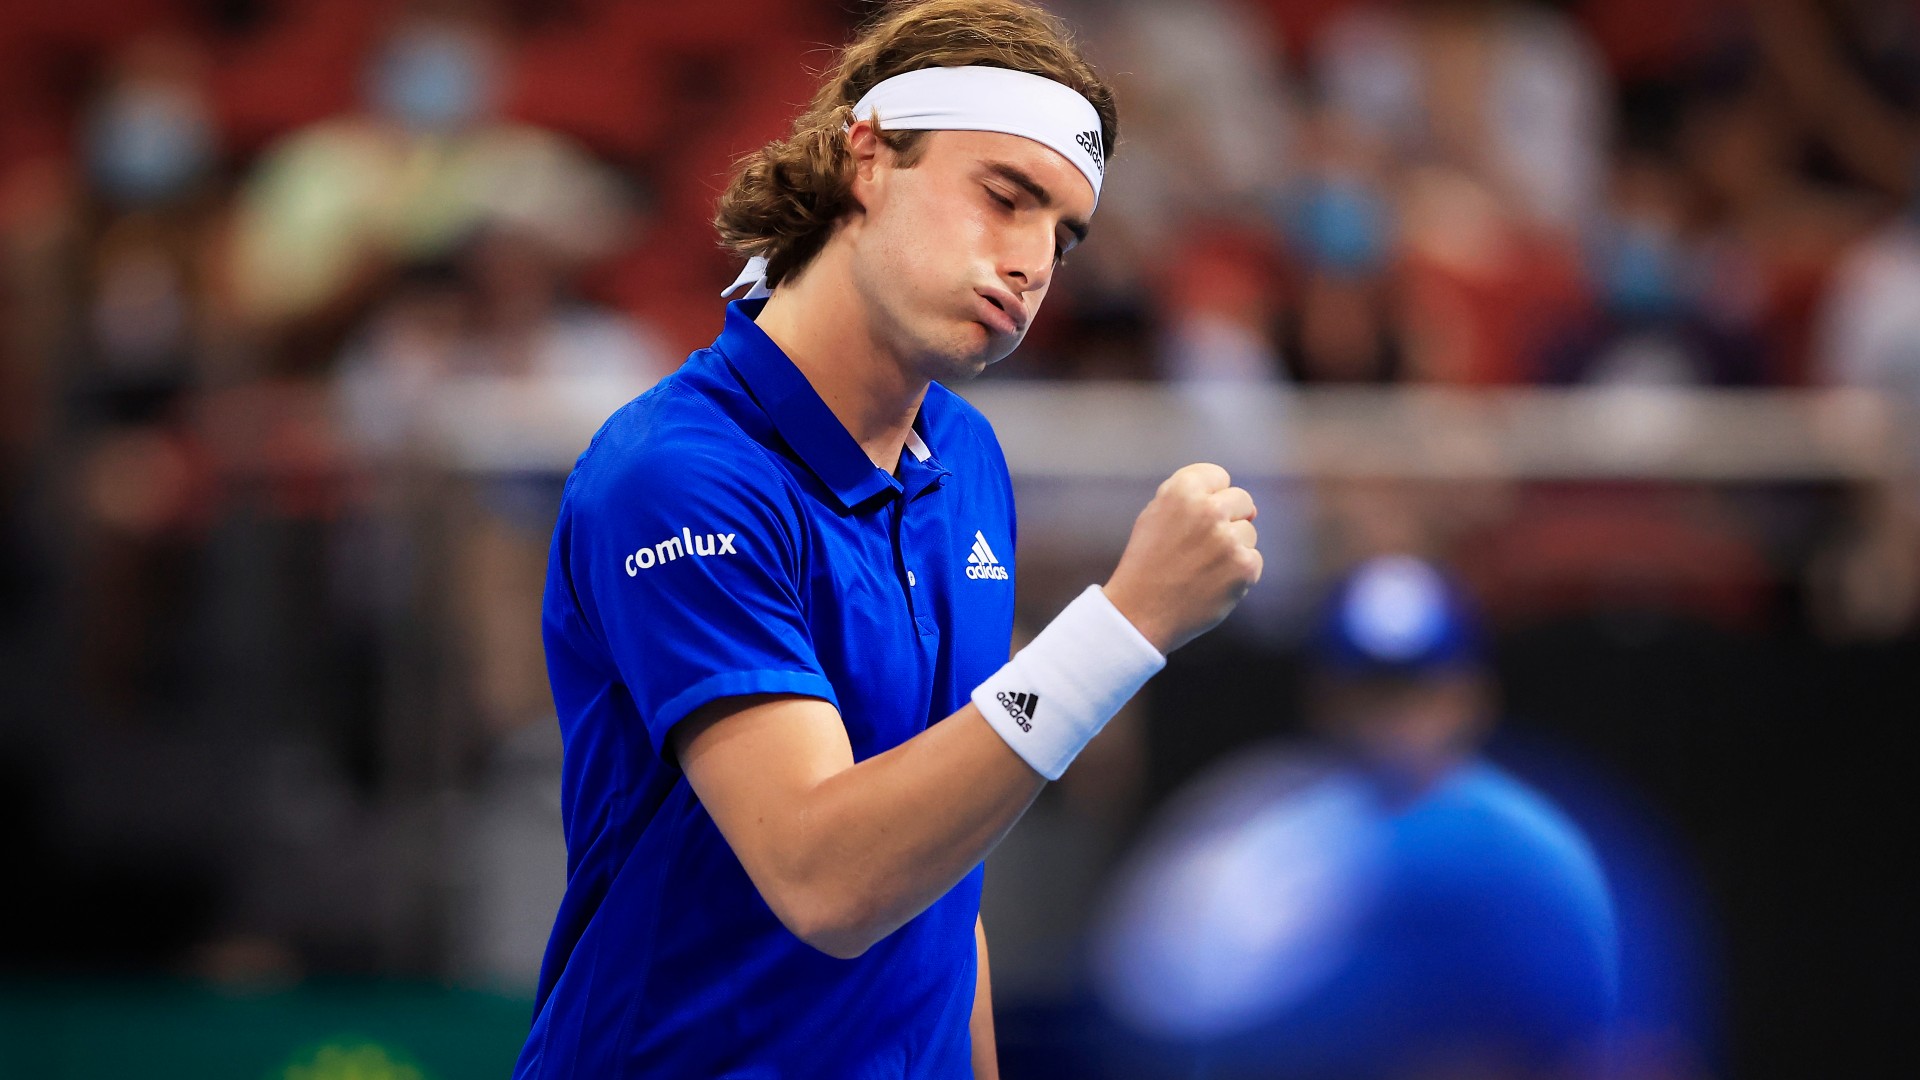 ATP Cup 2022 Greece beaten by Poland as Stefanos Tsitsipas misses singles tie